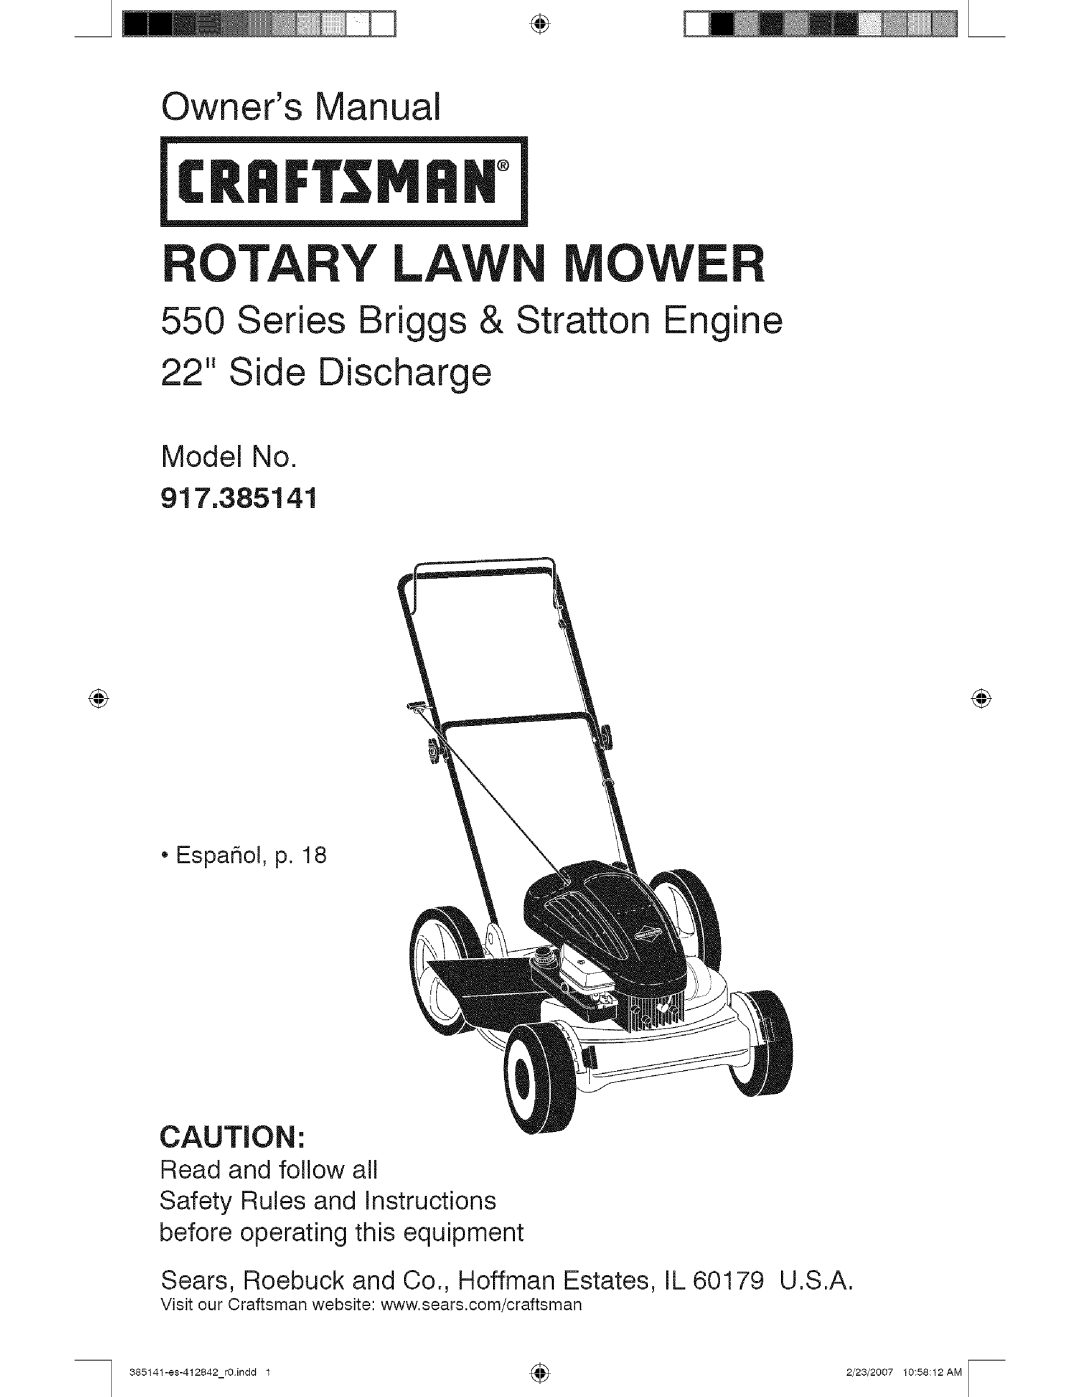 Craftsman owner manual Model No 917,385141, Rotary, Owners Manual, Series Briggs & Stratton Engine, Side Discharge 